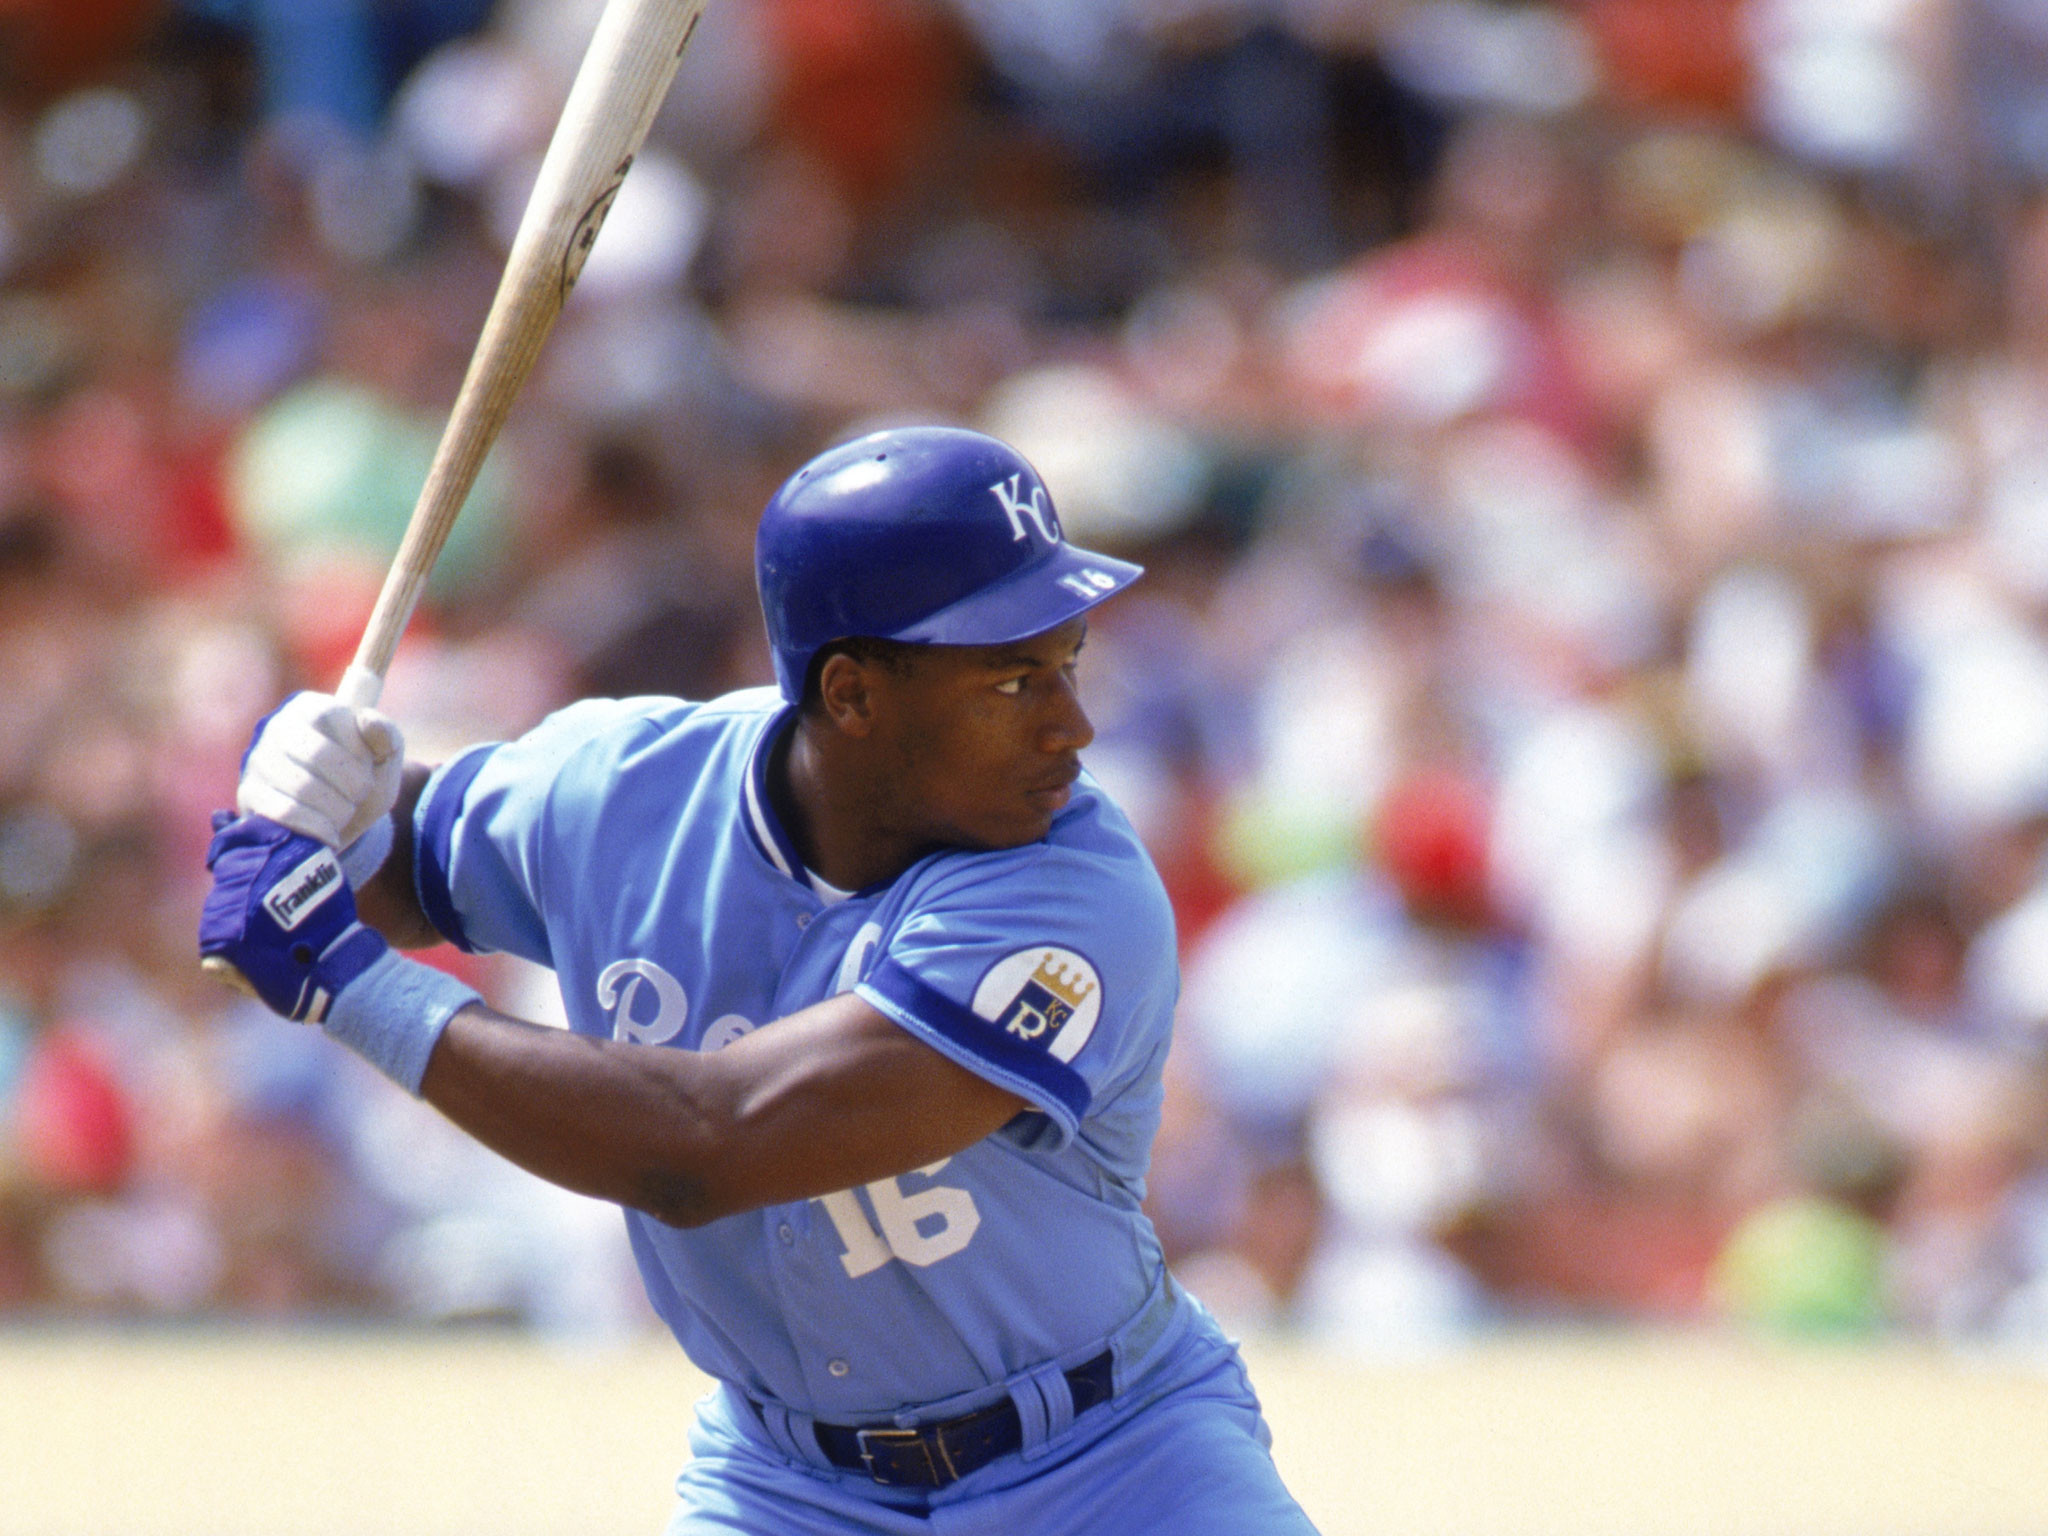 Sporting Heroes: Bo Jackson's efforts in two sports earn legend status |  The Independent